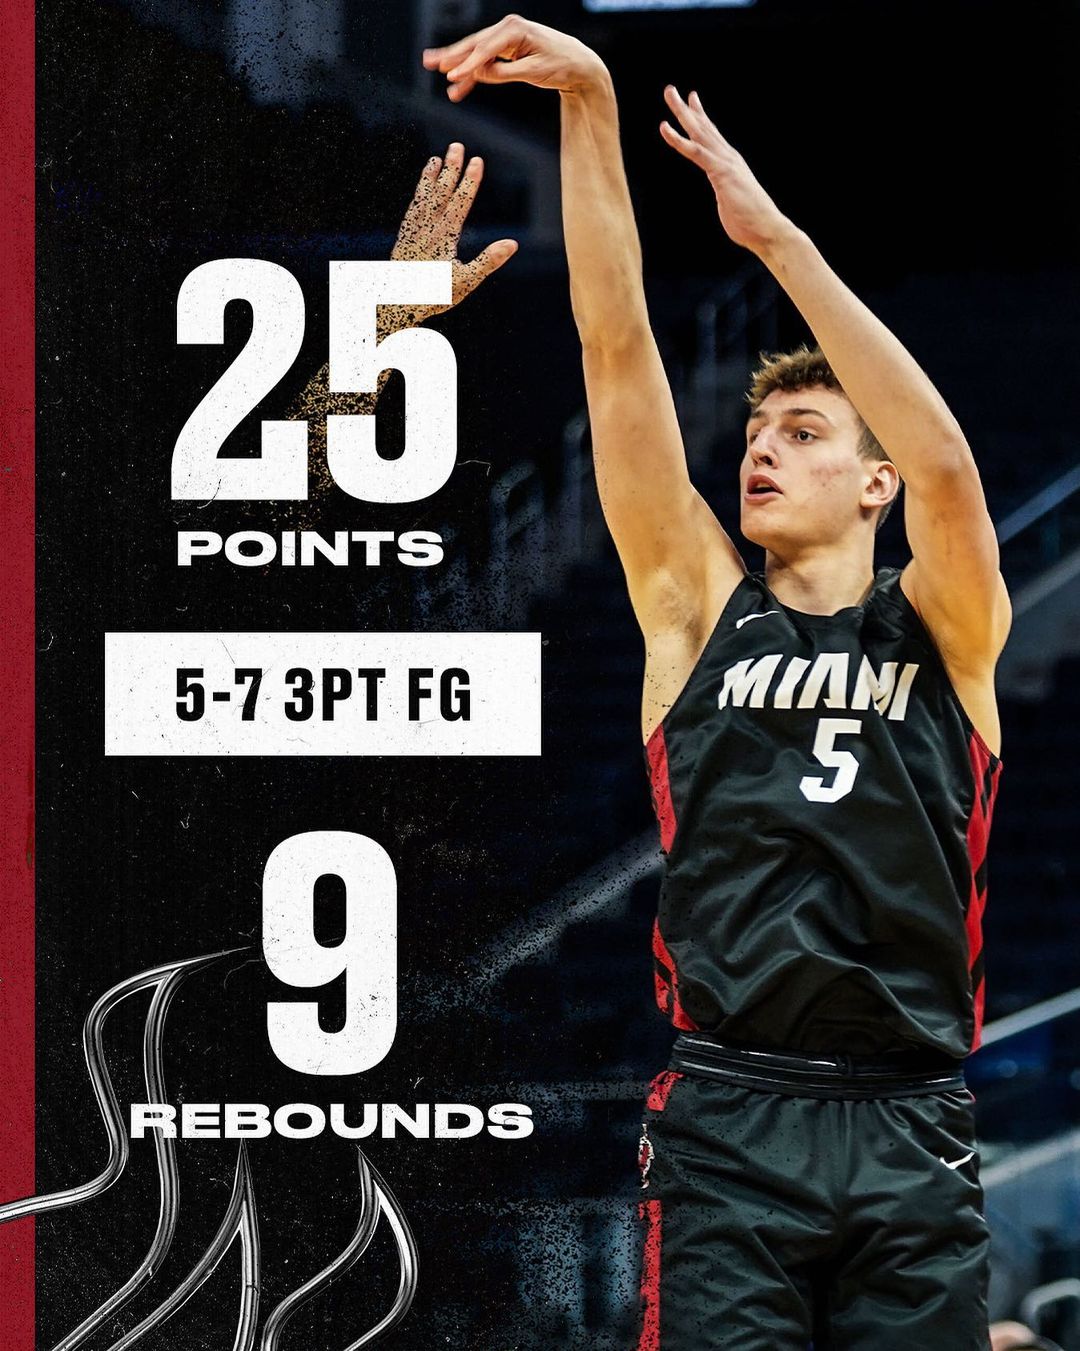 that’s a #HEATSummer stat line to be proud of...